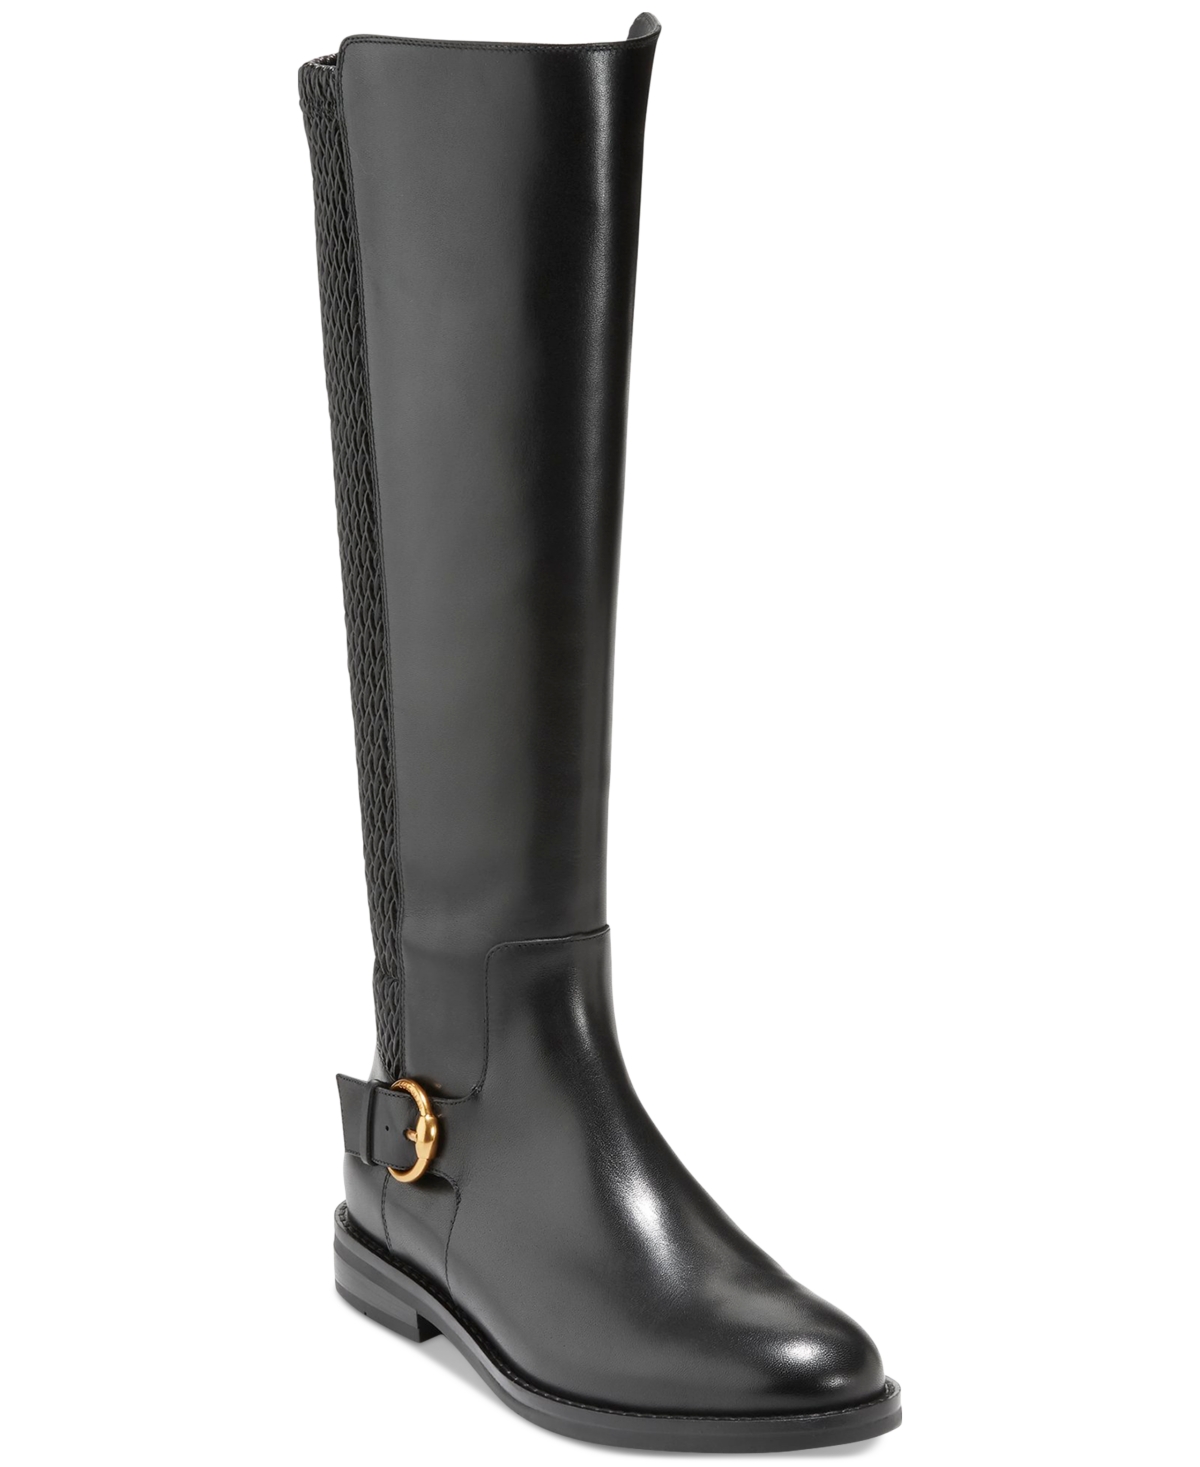 COLE HAAN WOMEN'S CLOVER STRETCH SIDE-BUCKLE RIDING BOOTS